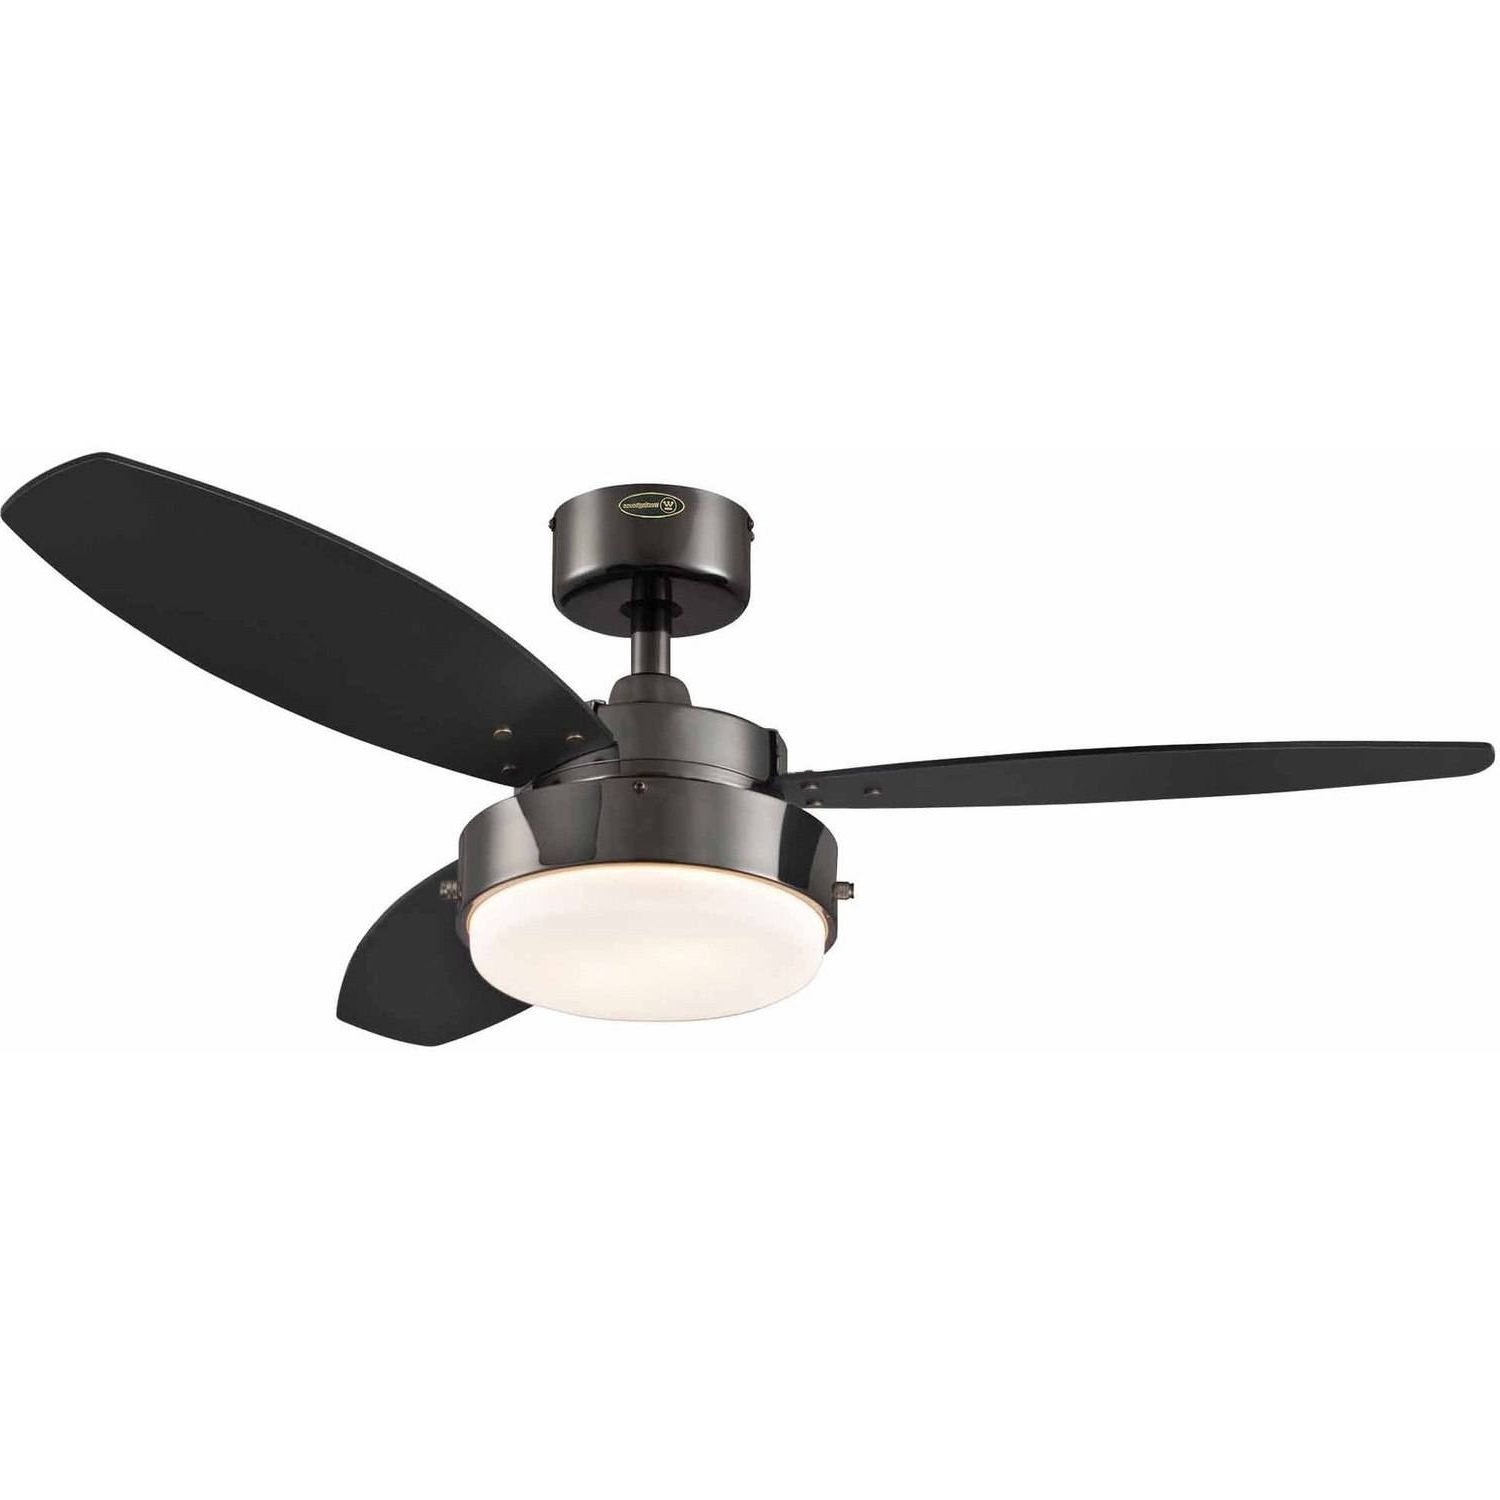 Westinghouse 7876400 42" Gun Metal 3 Blade Reversible Ceiling Fan For Most Recent Outdoor Ceiling Fans With Metal Blades (View 3 of 20)